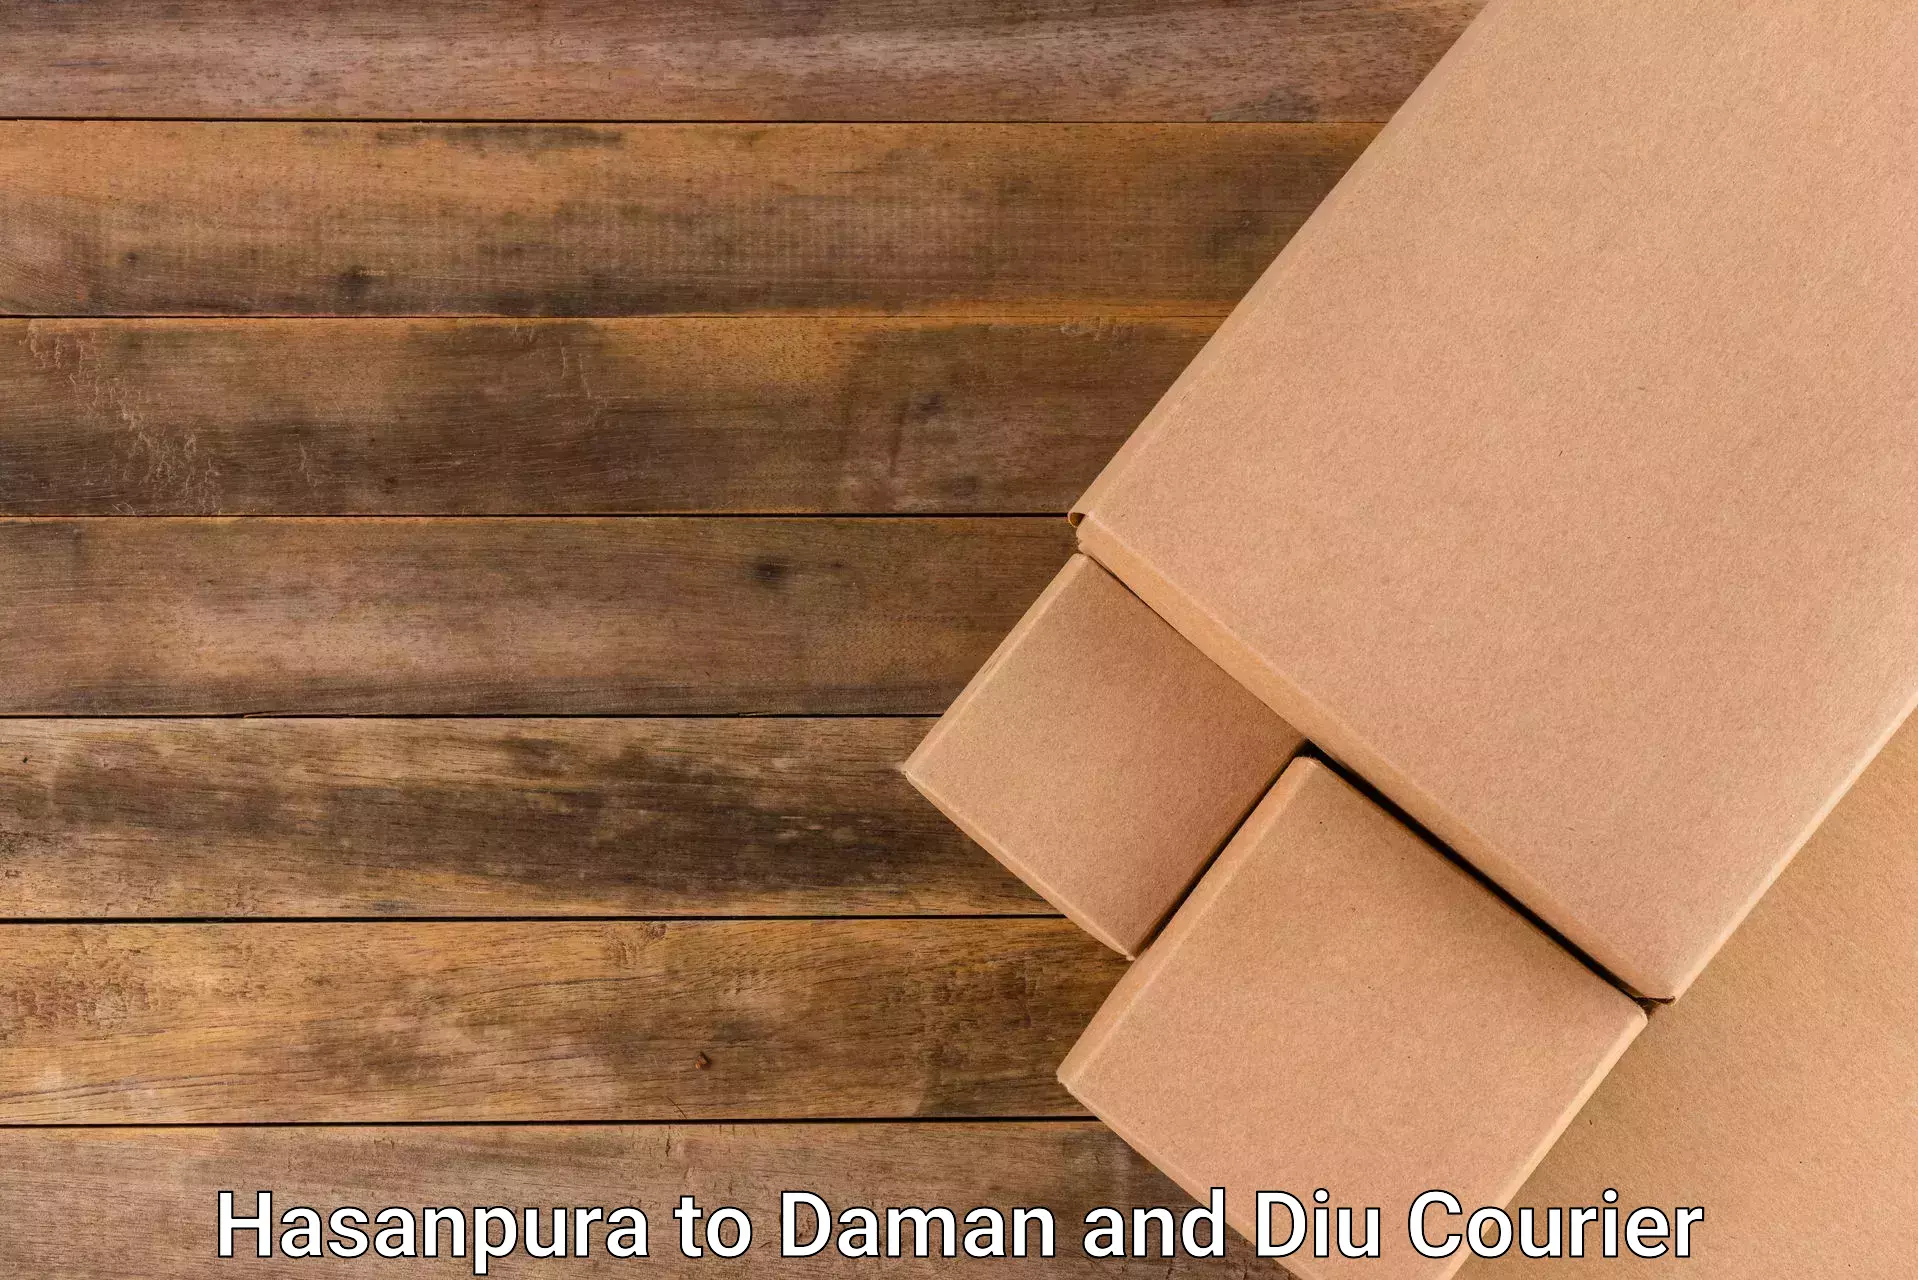 Advanced package delivery in Hasanpura to Daman